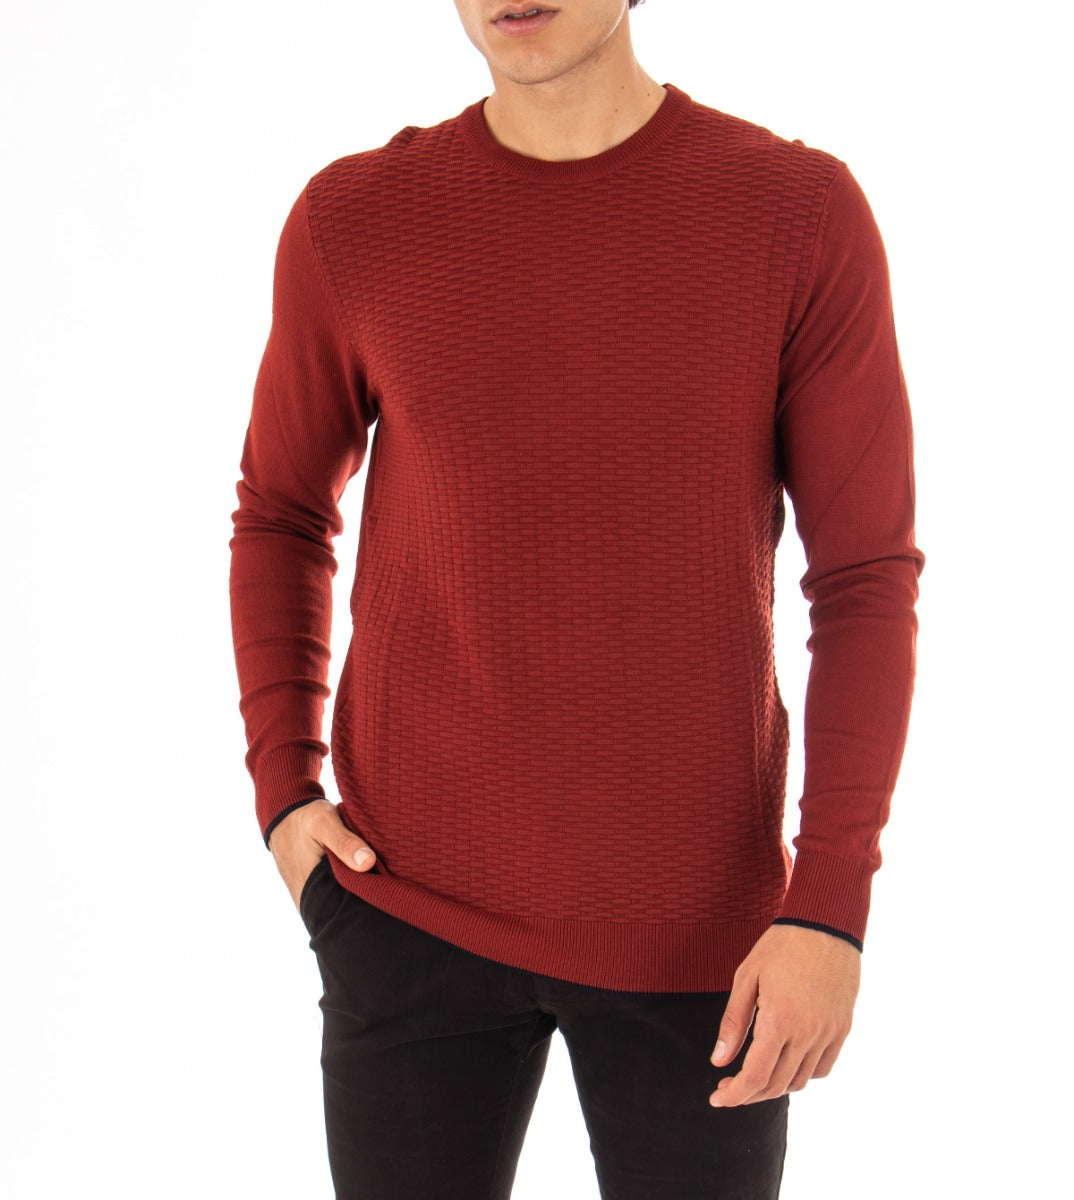 Men's Sweater Long Sleeves Solid Color Brick q Crewneck Casual Pattern GIOSAL